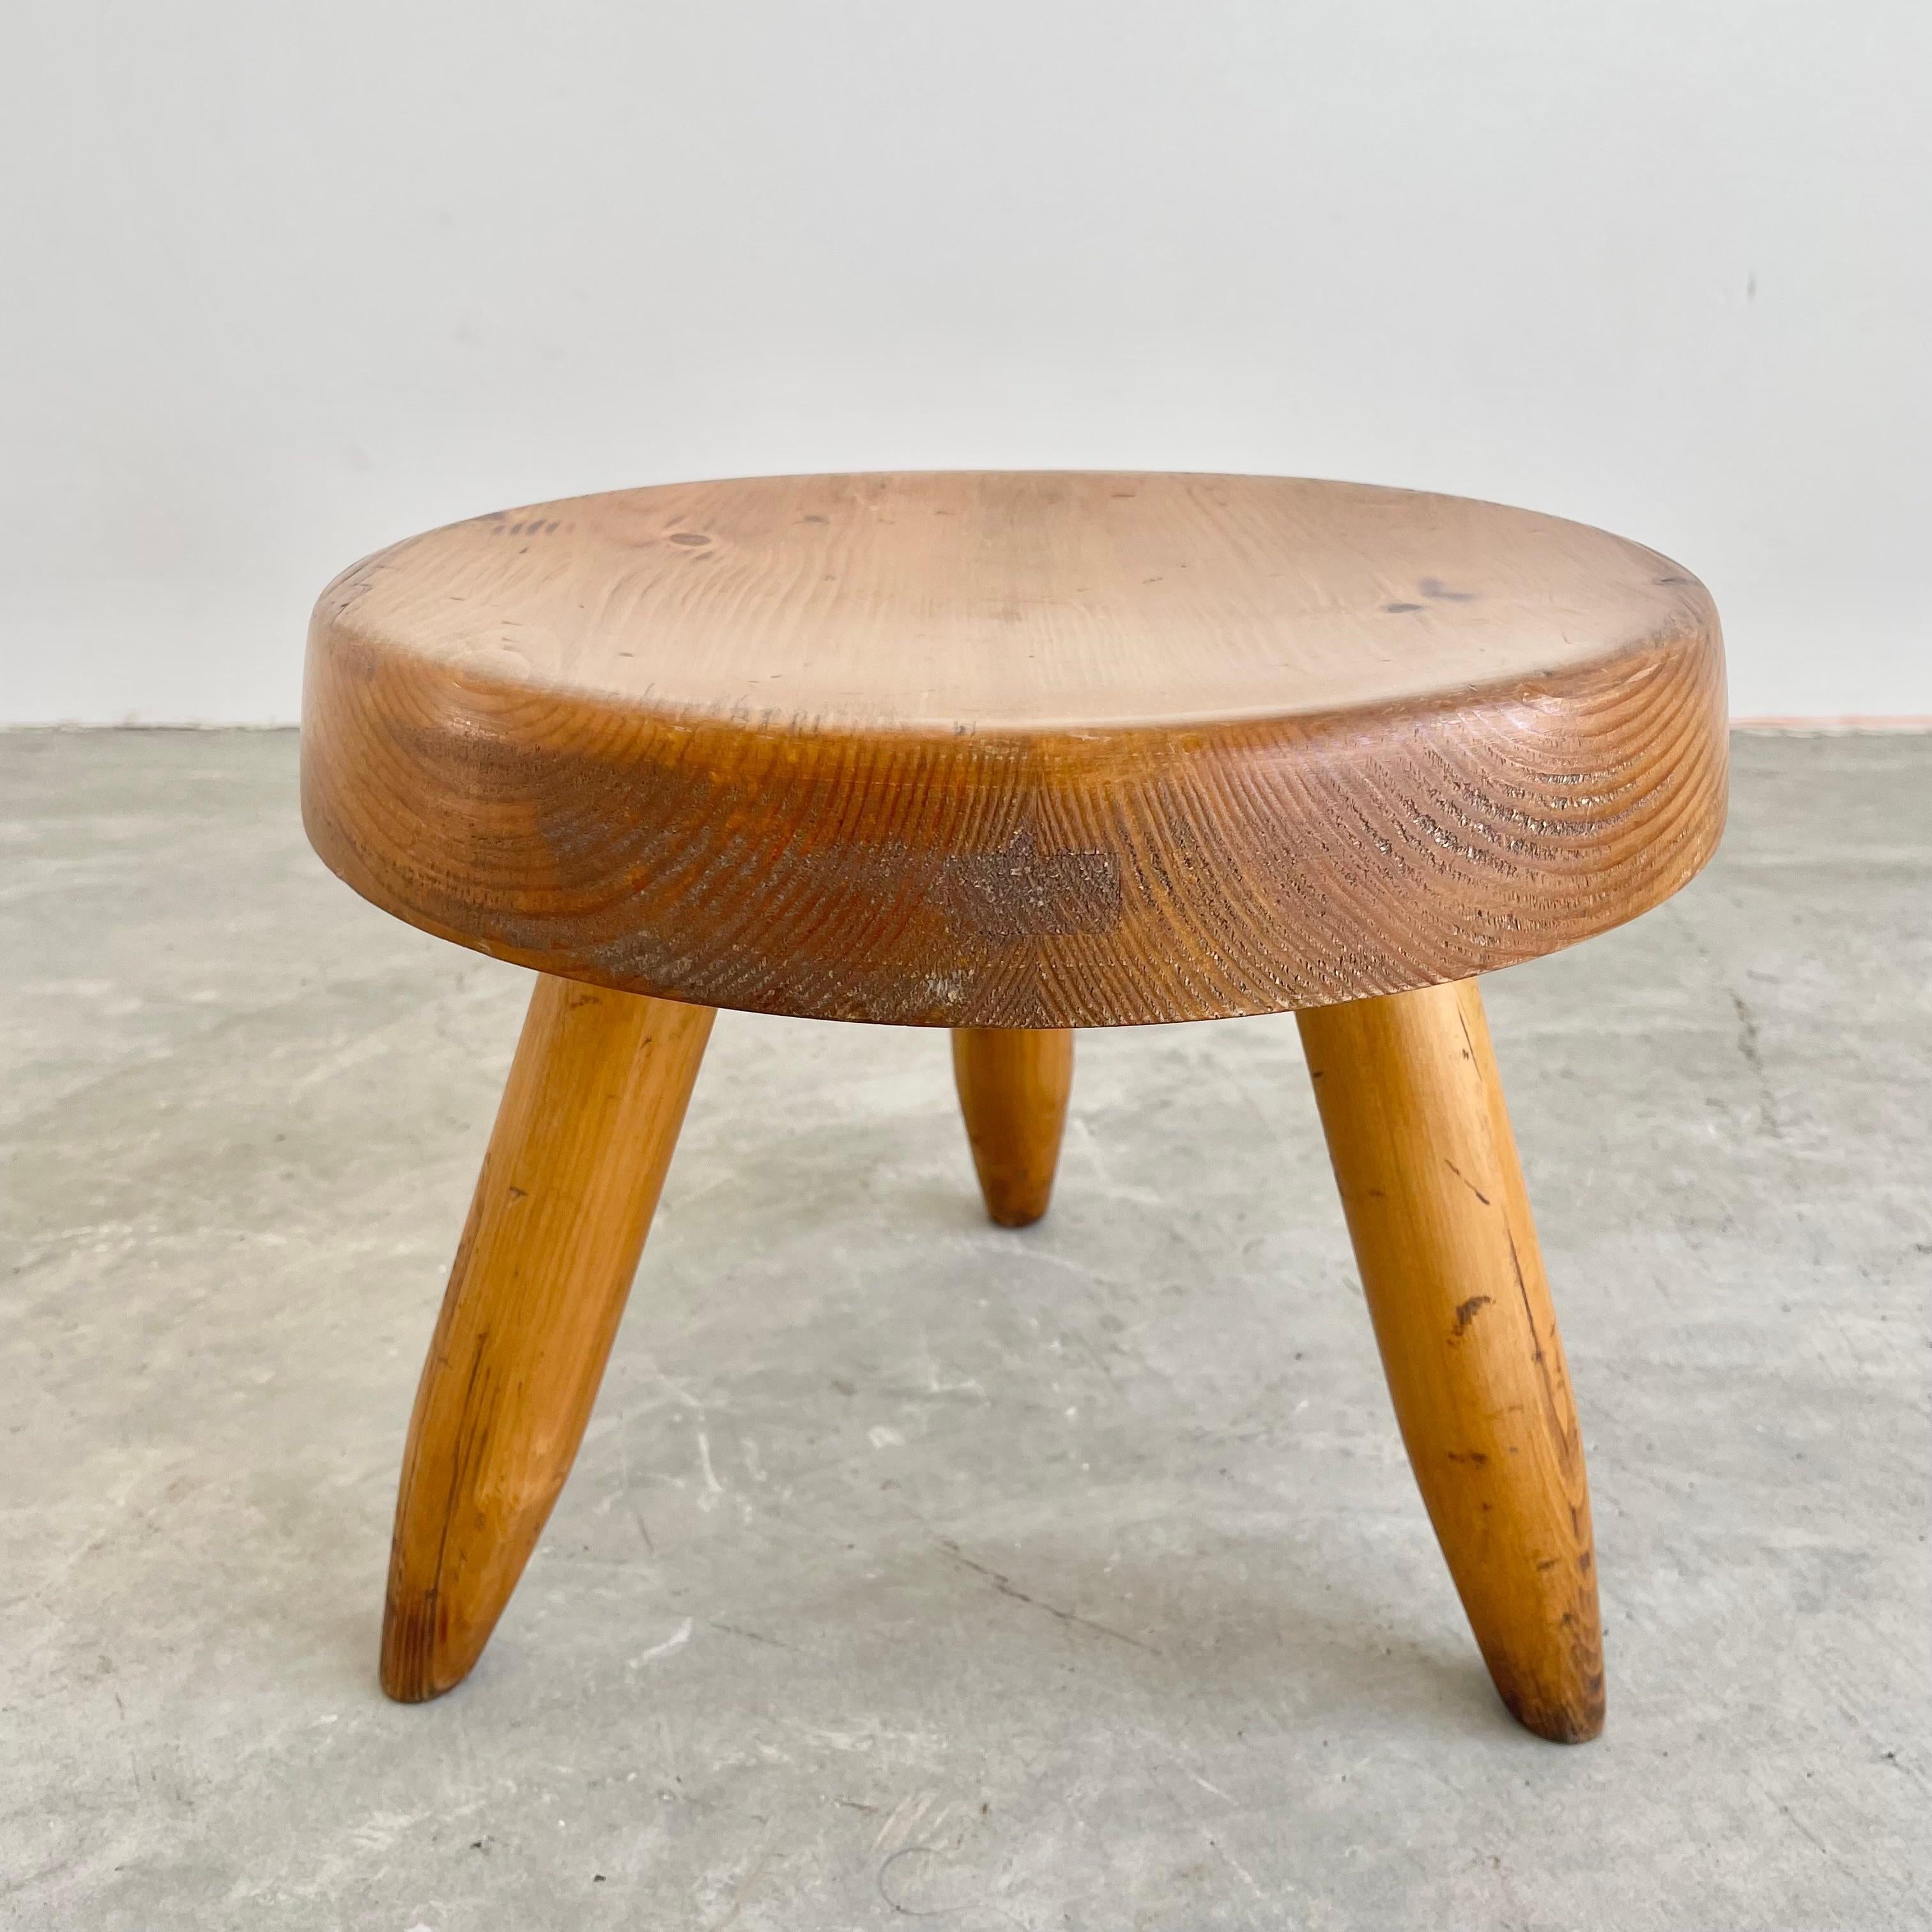 Collectible Berger stool by Charlotte Perriand. Circa 1950s. This french oak stool is in good condition, with slight wear and excellent patina. You can find this stool featured in the Charlotte Perriand complete works Volume 2.